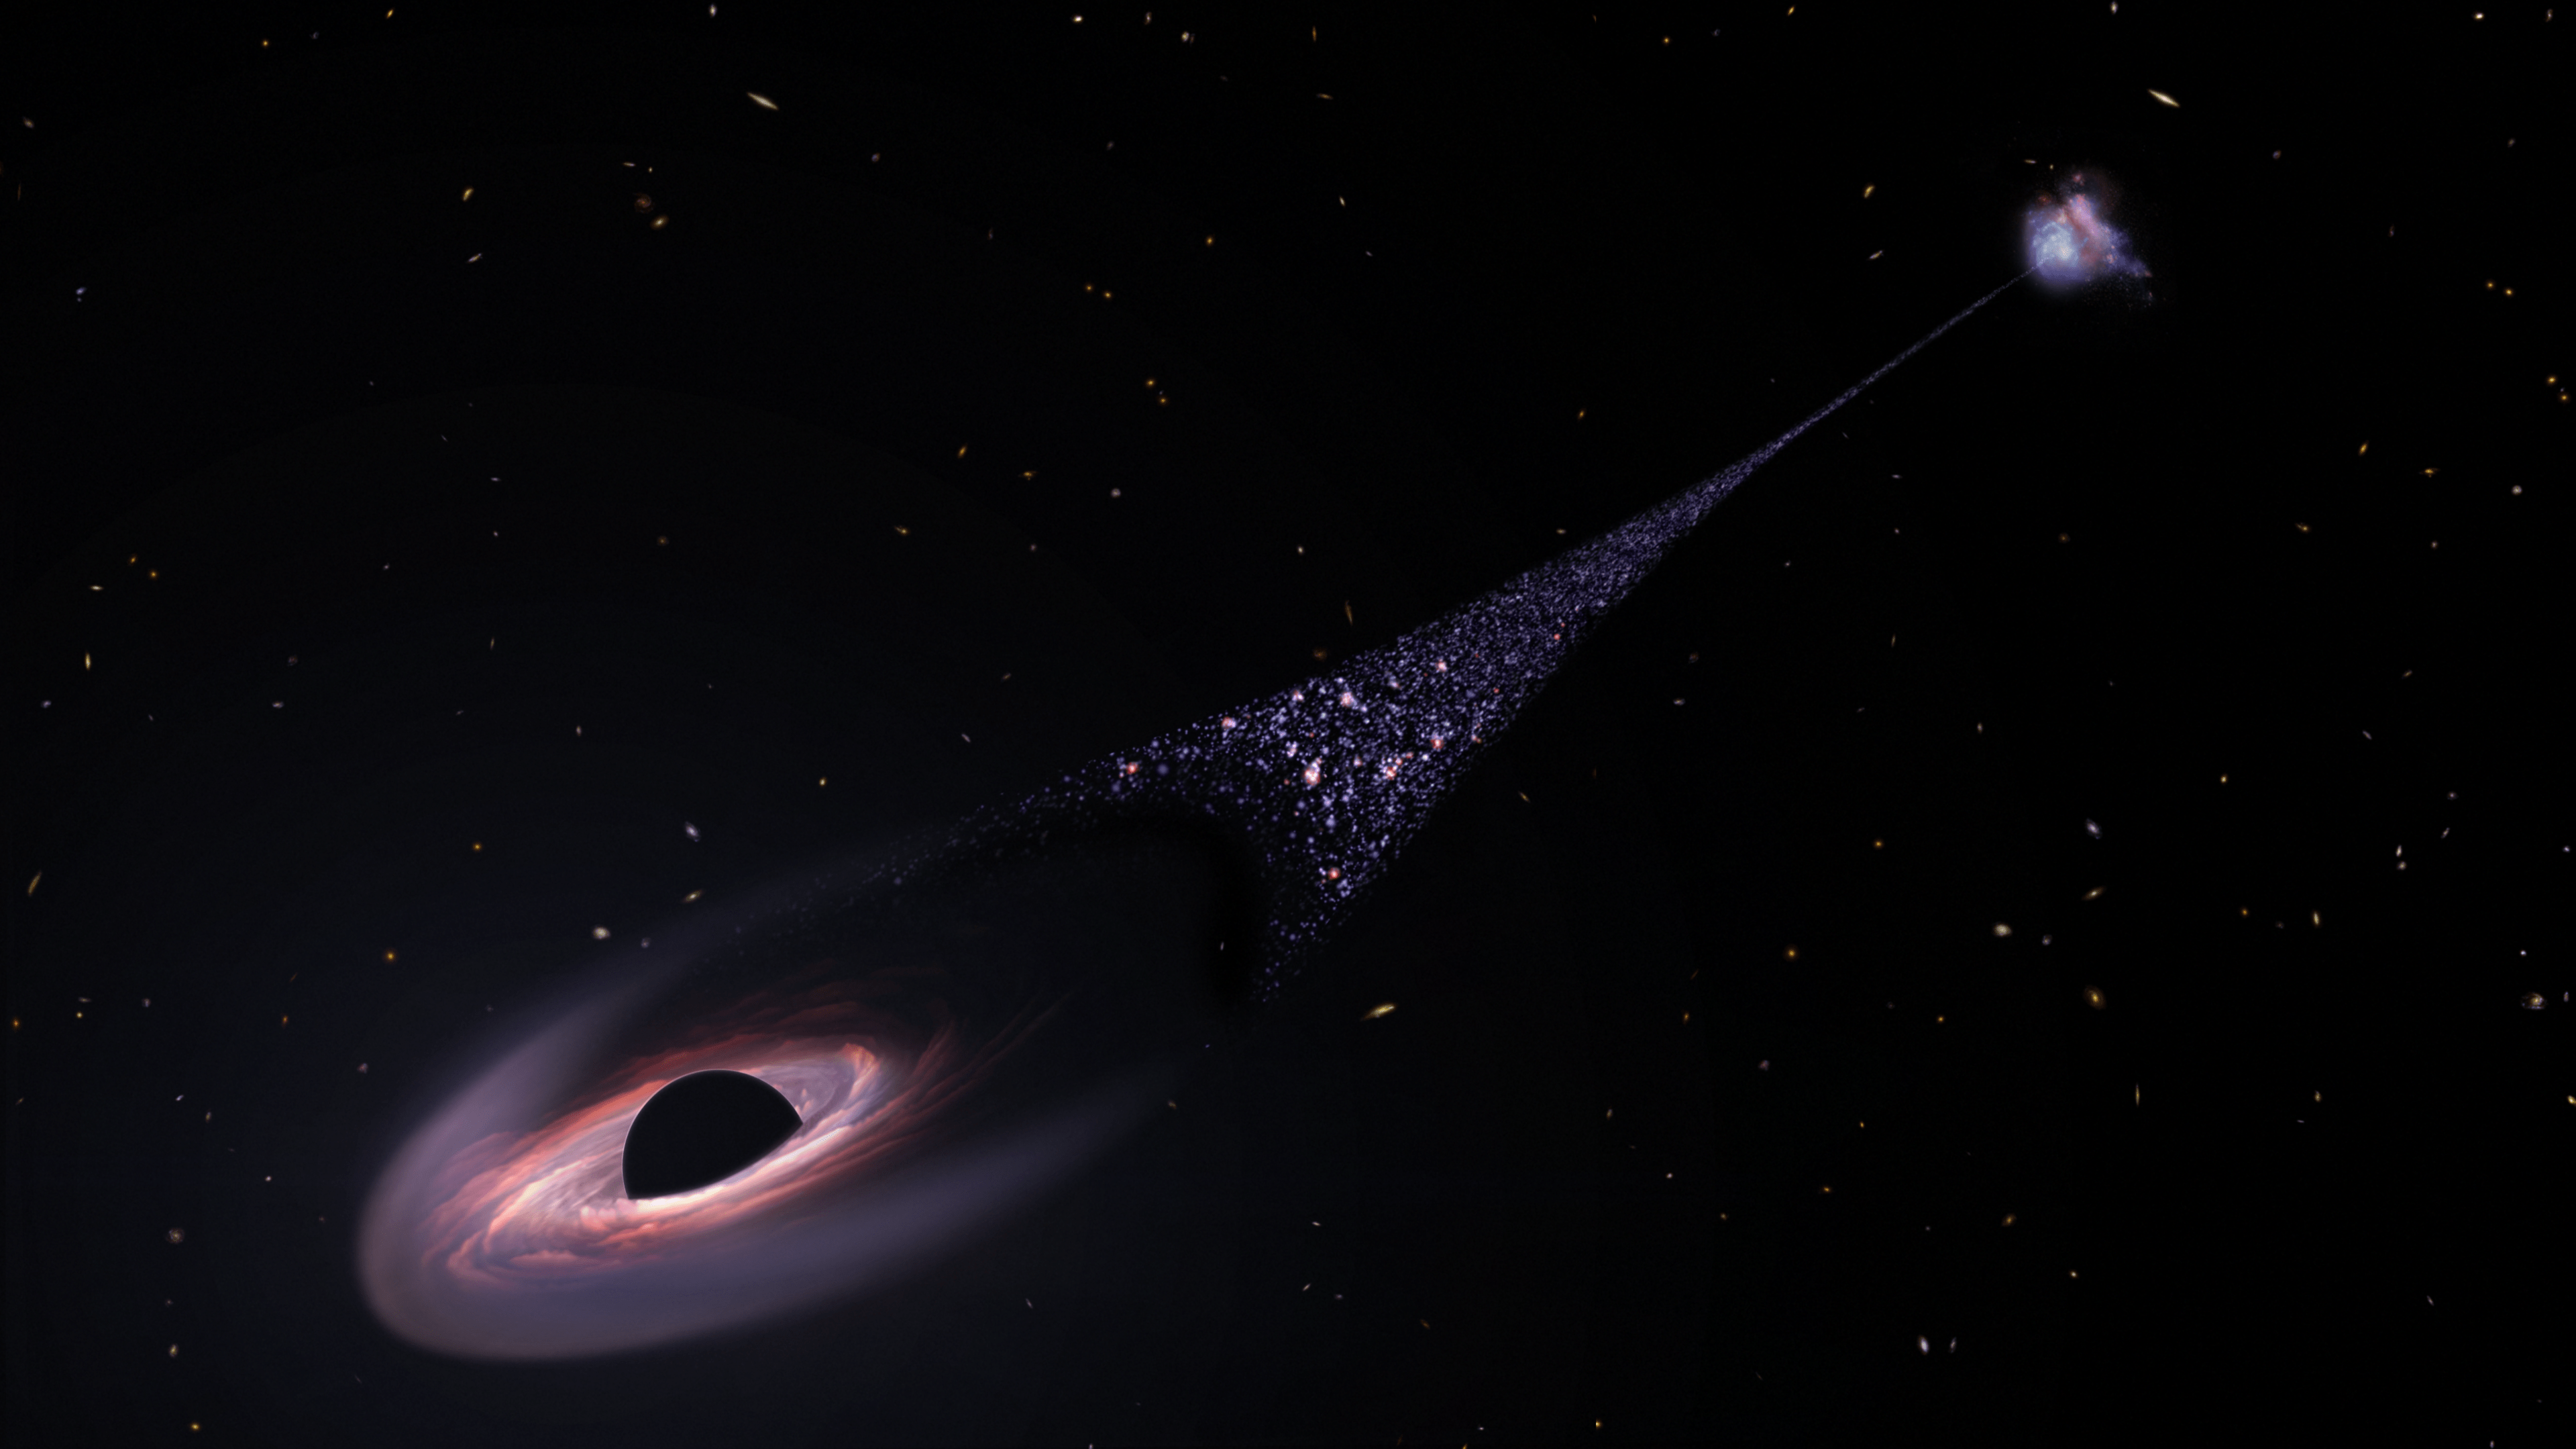 Illustration: black field with white, yellow, and red galaxies. A black hole near bottom left corner plows through space, leaving a diagonal trail of newborn stars stretching back to the black hole's parent galaxy in the upper right corner.